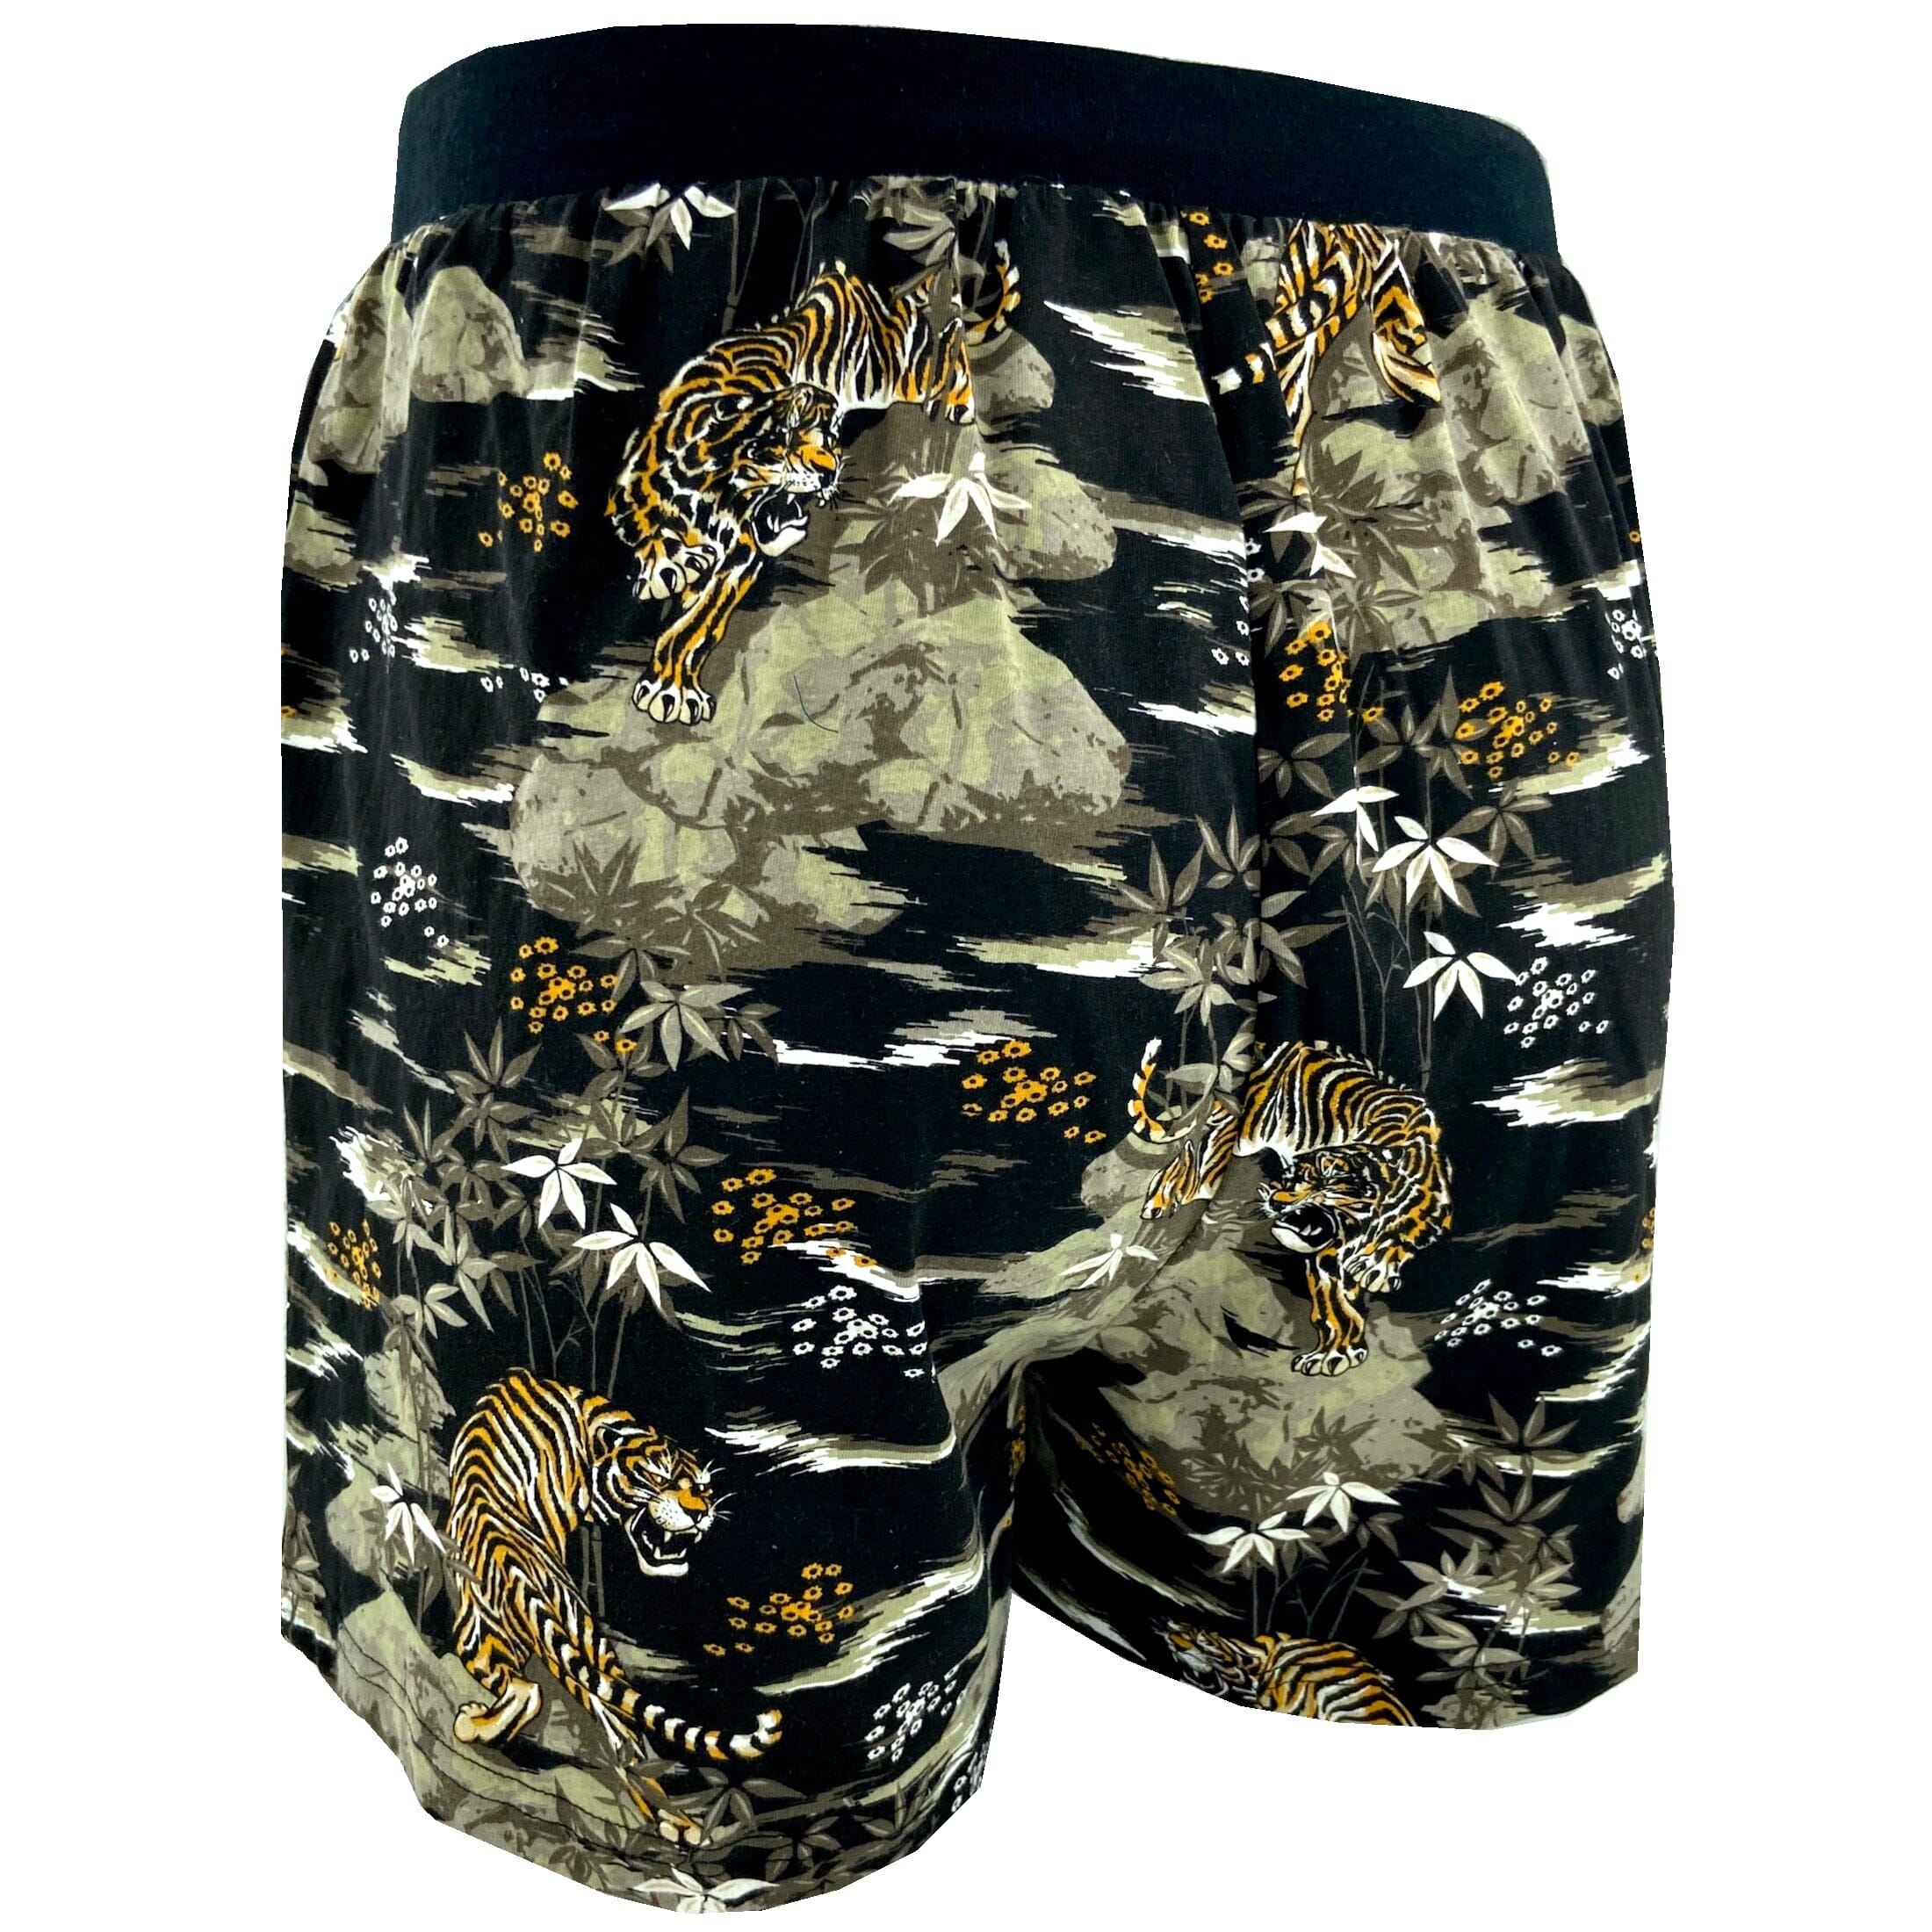 Comfy Sleepwear Cute Tiger All Over Print Cotton Pajama Shorts for Men